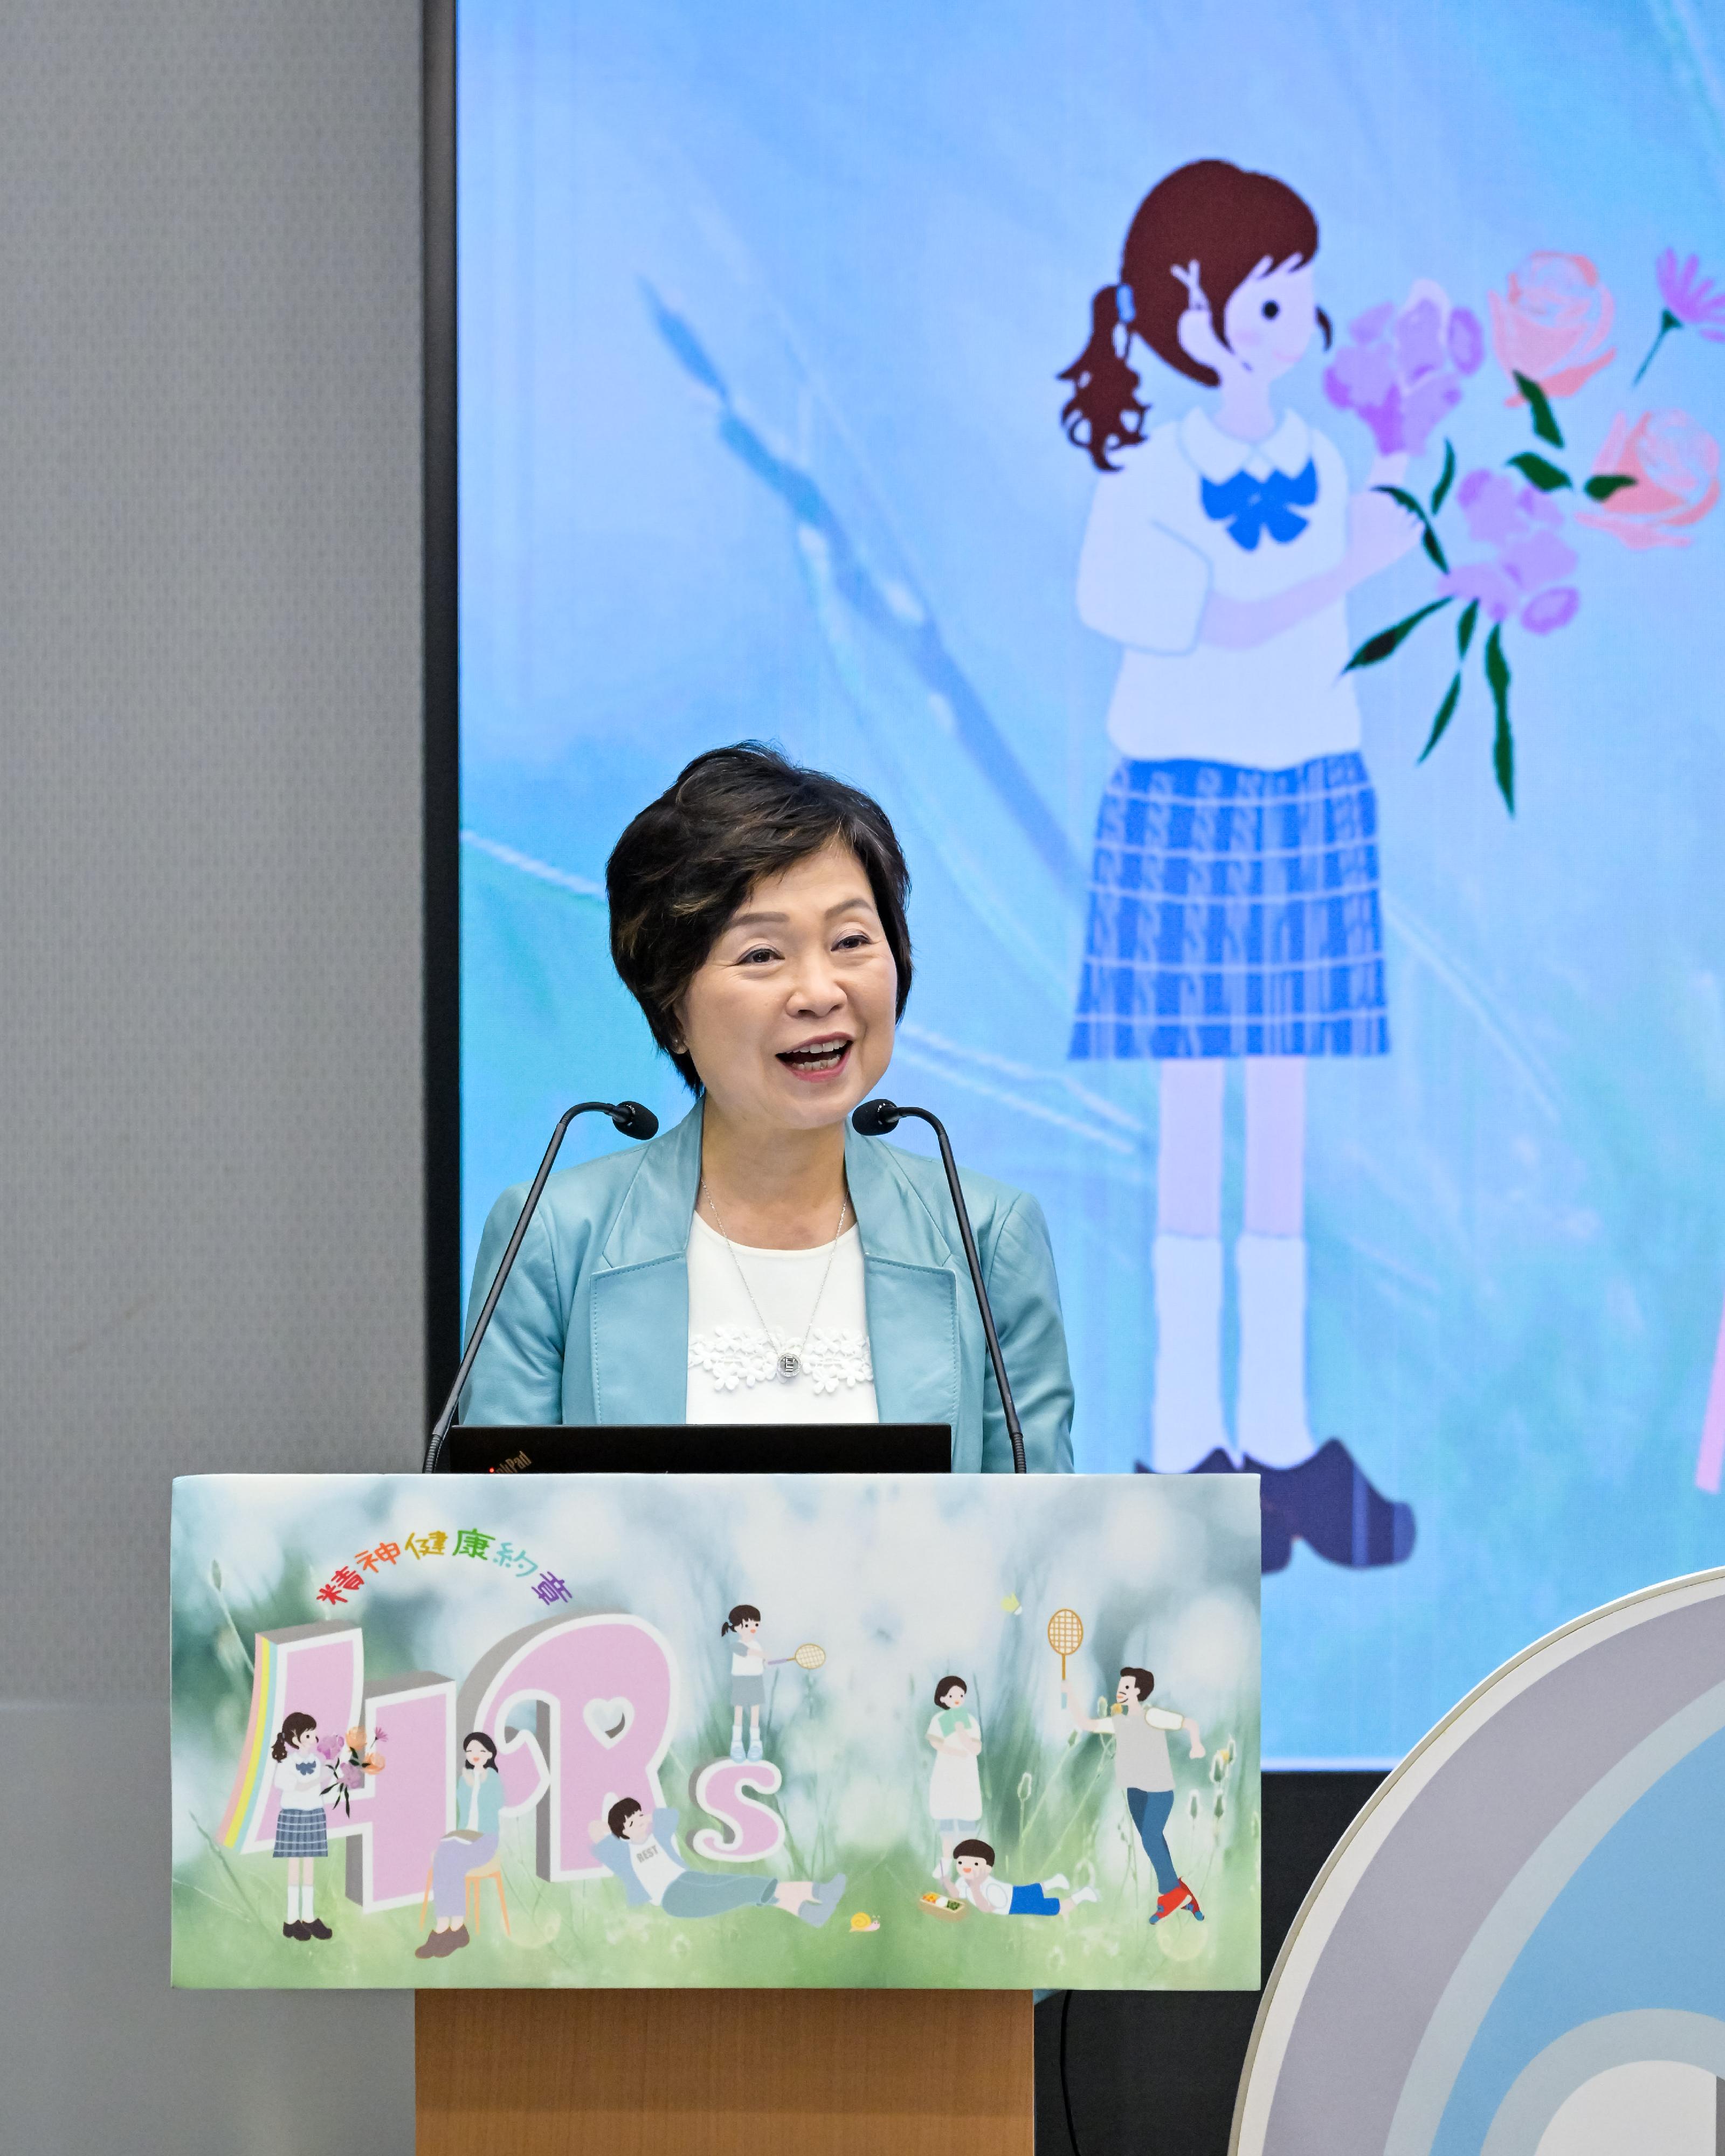 The Secretary for Education, Dr Choi Yuk-lin, delivers a speech at the 4Rs Mental Health Charter Launching Ceremony cum Briefing Session today (April 12).